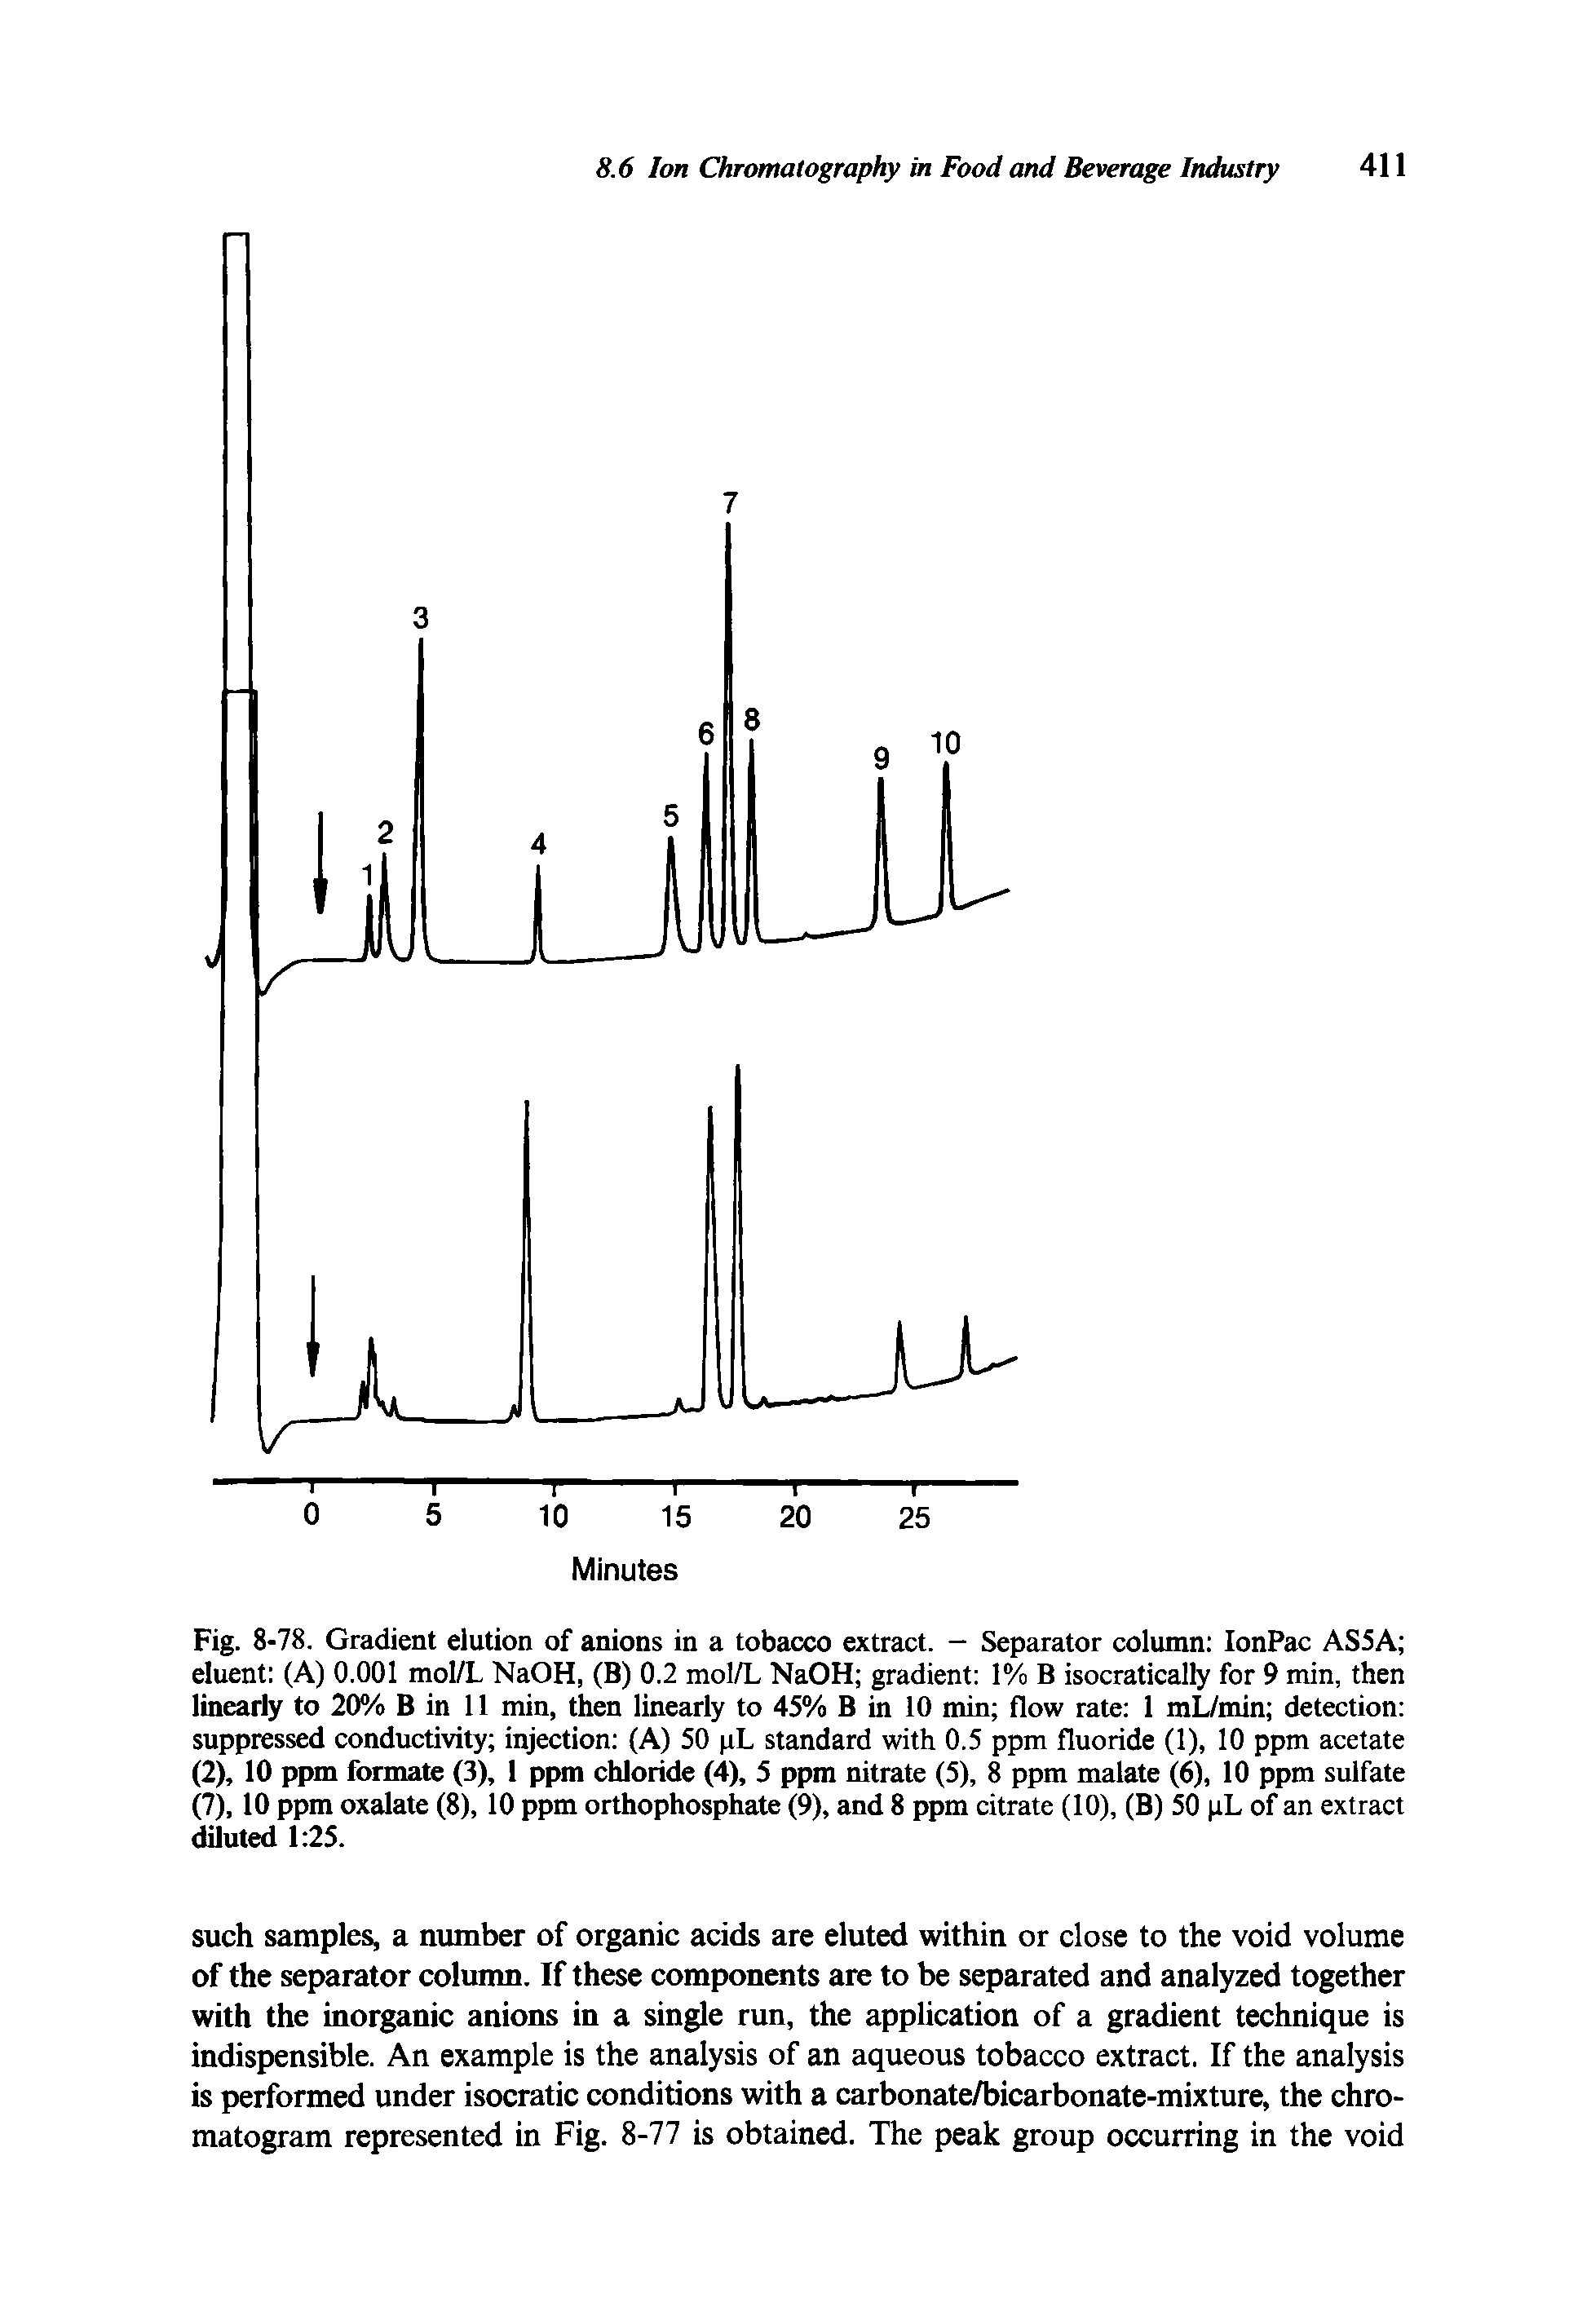 Fig. 8-78. Gradient elution of anions in a tobacco extract. - Separator column IonPac AS5A eluent (A) 0.001 mol/L NaOH, (B) 0.2 mol/L NaOH gradient 1% B isocratically for 9 min, then linearly to 20% B in 11 min, then linearly to 45% B in 10 min flow rate 1 mL/min detection suppressed conductivity injection (A) 50 pL standard with 0.5 ppm fluoride (1), 10 ppm acetate (2), 10 ppm formate (3), 1 ppm chloride (4), 5 ppm nitrate (5), 8 ppm malate (6), 10 ppm sulfate (7), 10 ppm oxalate (8), 10 ppm orthophosphate (9), and 8 ppm citrate (10), (B) 50 pL of an extract diluted 1 25.